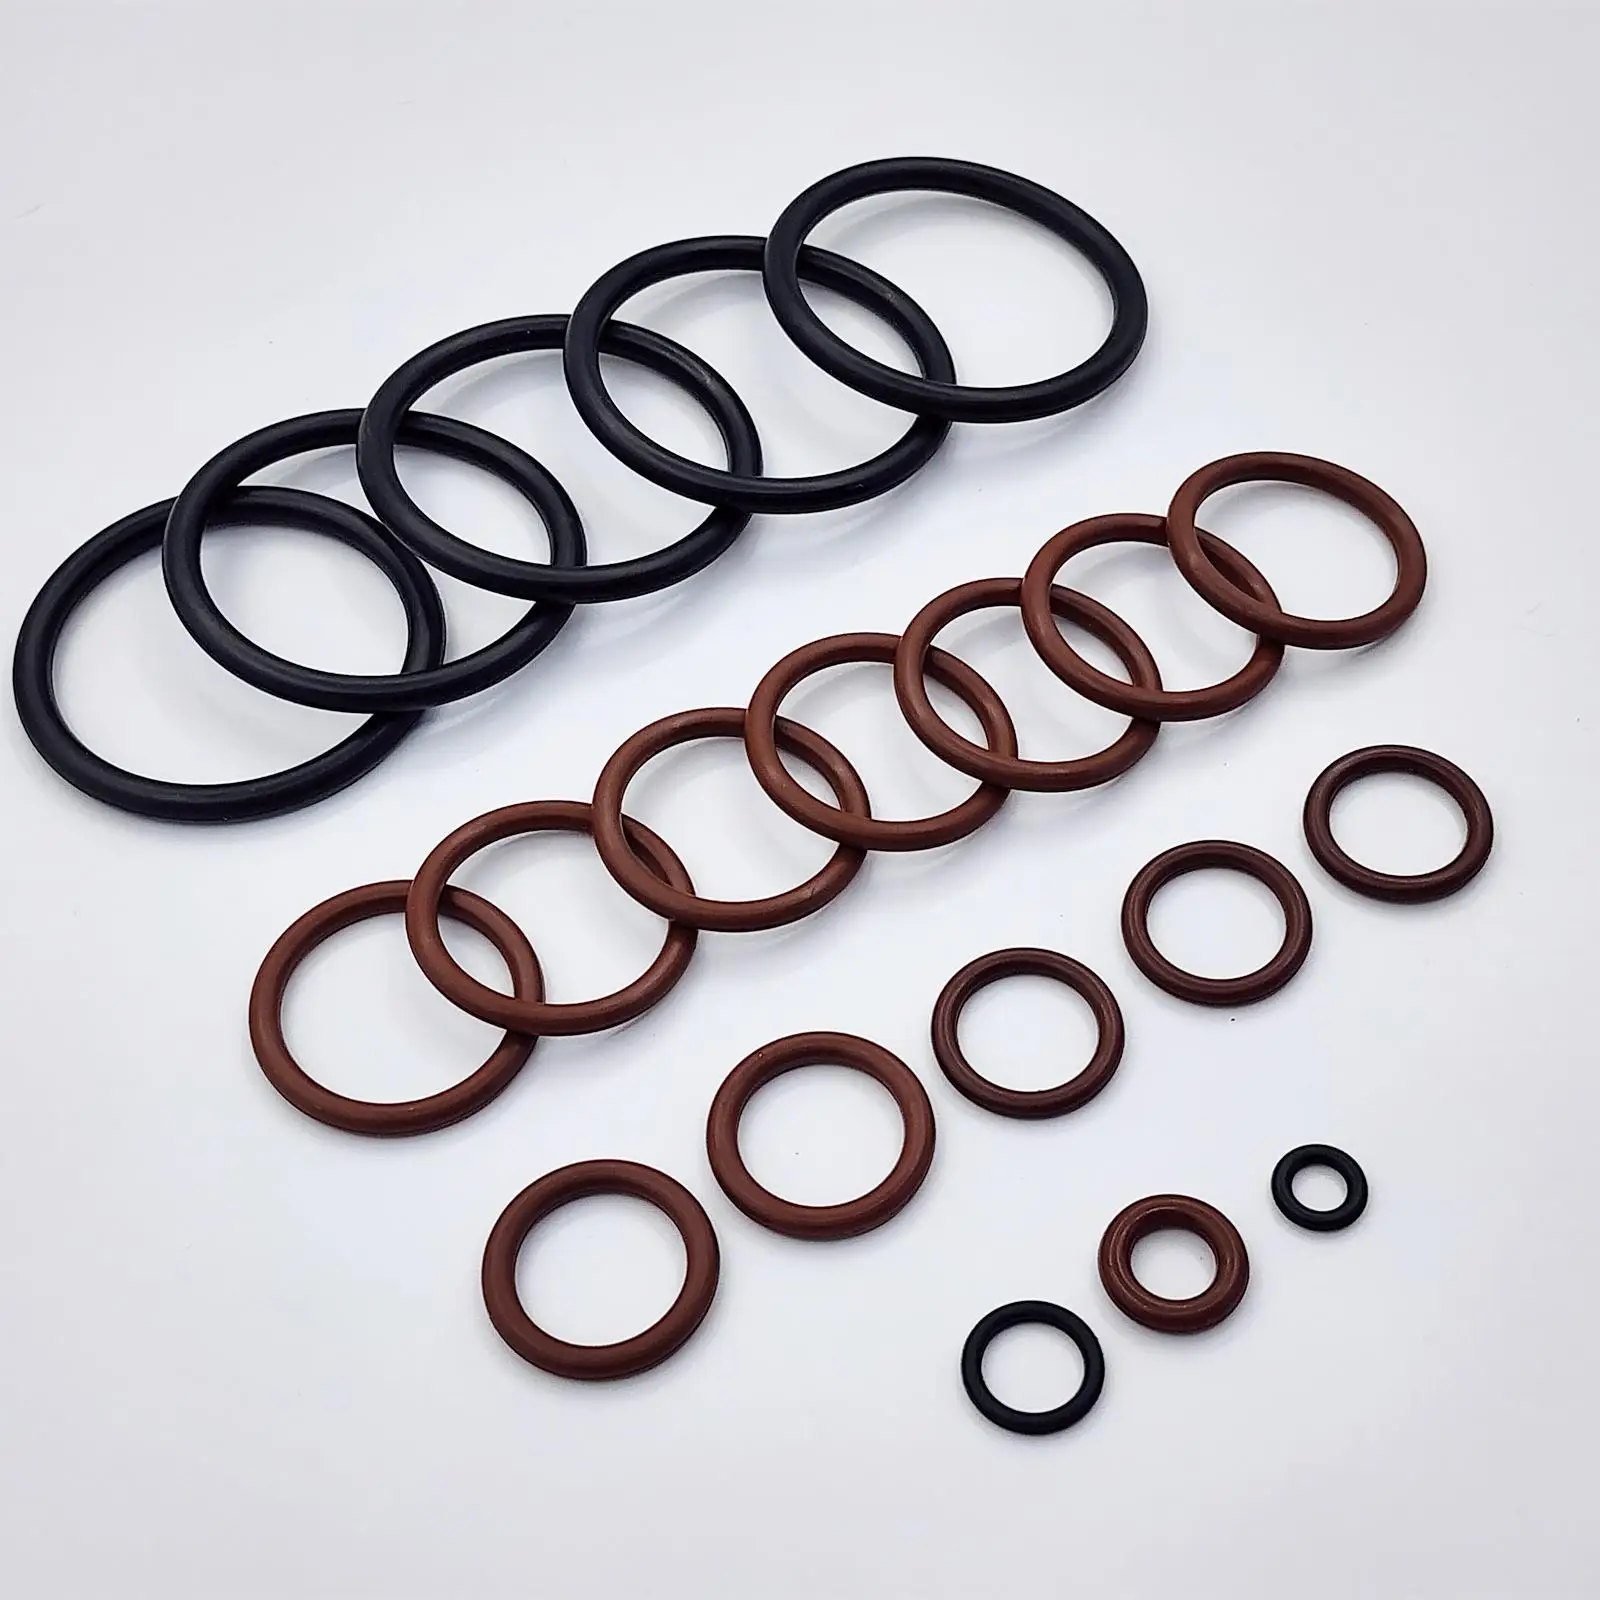 Cooling System O-Ring Kit Durable Washer Rubber for BMW E46 M52 M54 Car